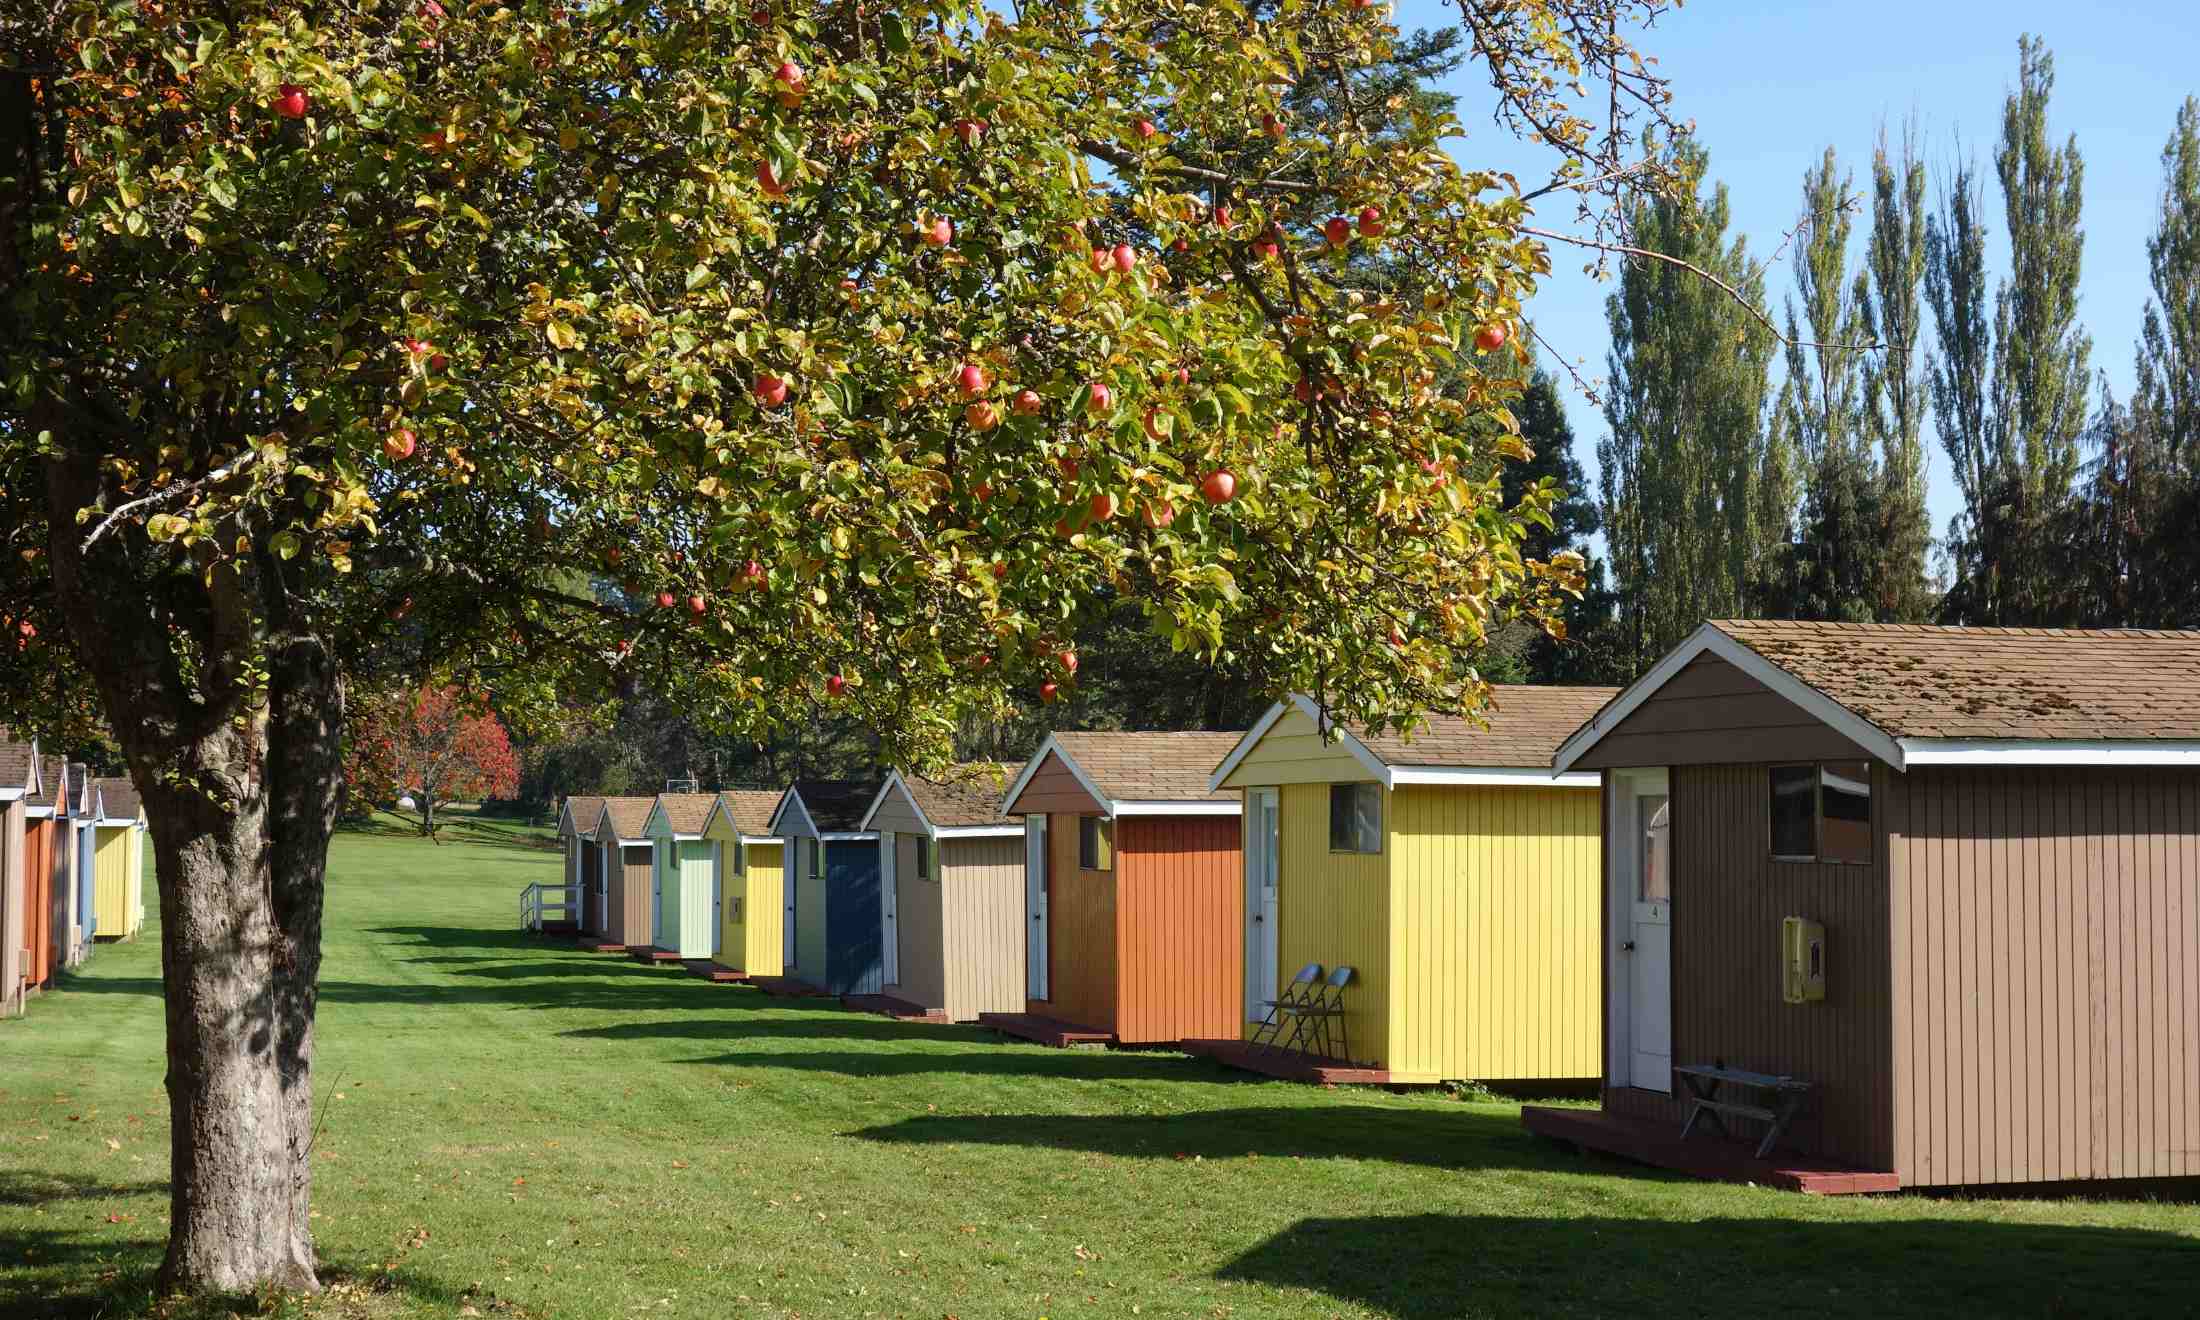 An apple tree hangs above colorful cabins at camp samish.